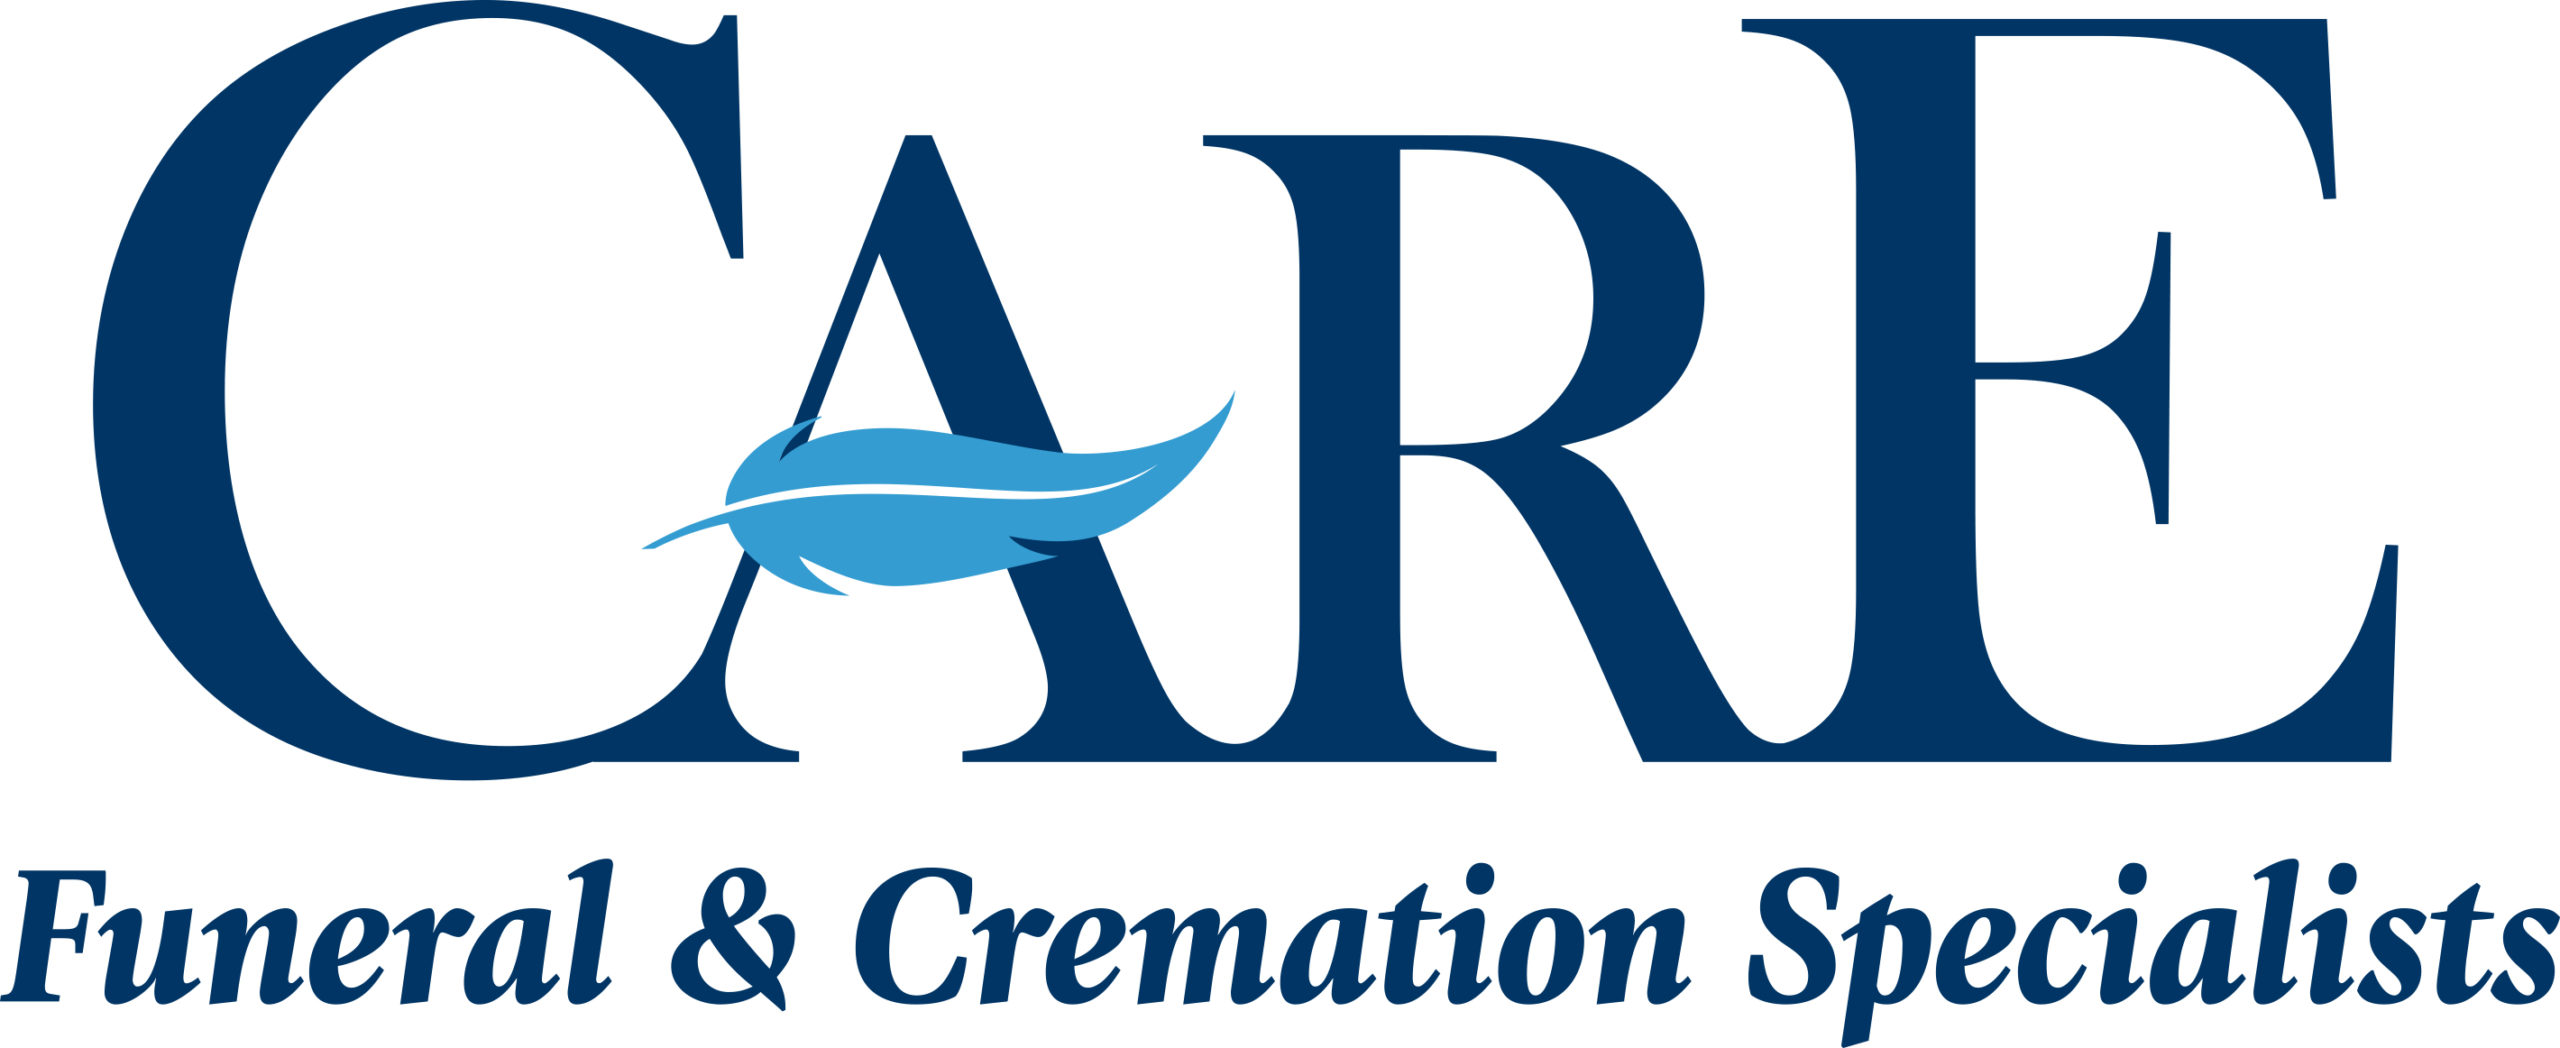 Care FUneral and Cremation Specialist Logo